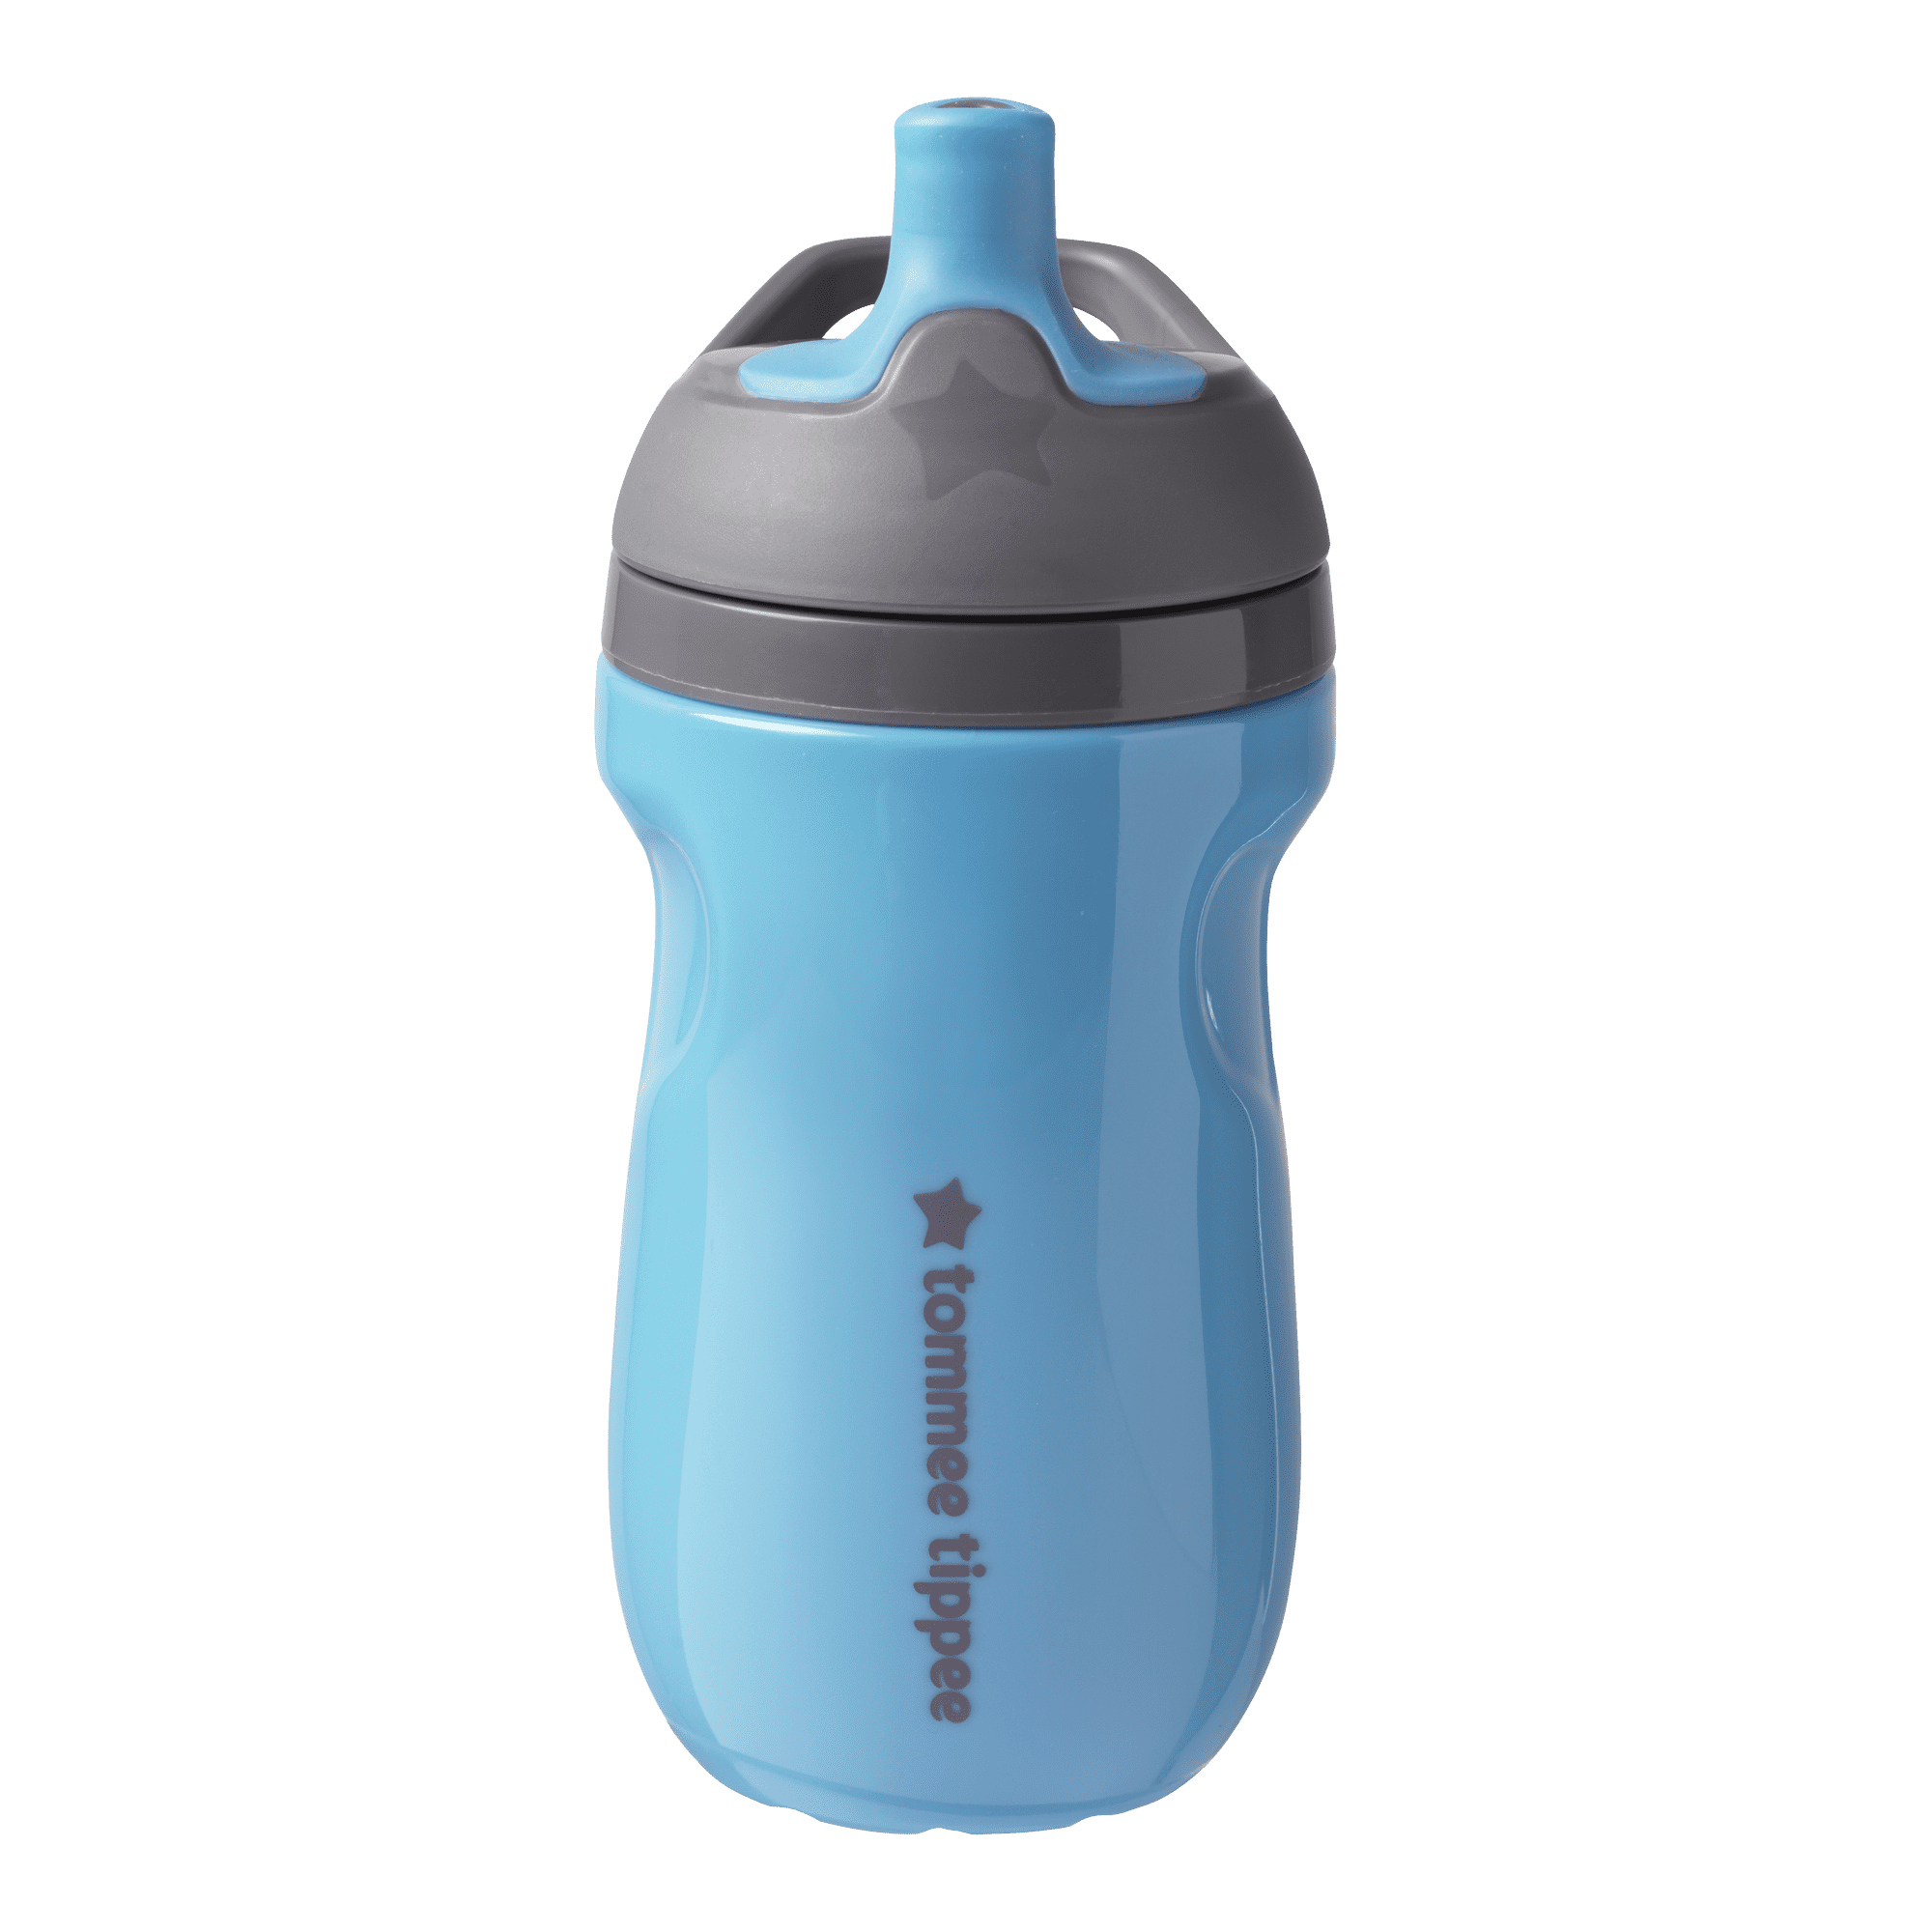 Tommee Tippee 2pk Insulated Sportee Toddler Water Bottle With Handle - 9oz  : Target